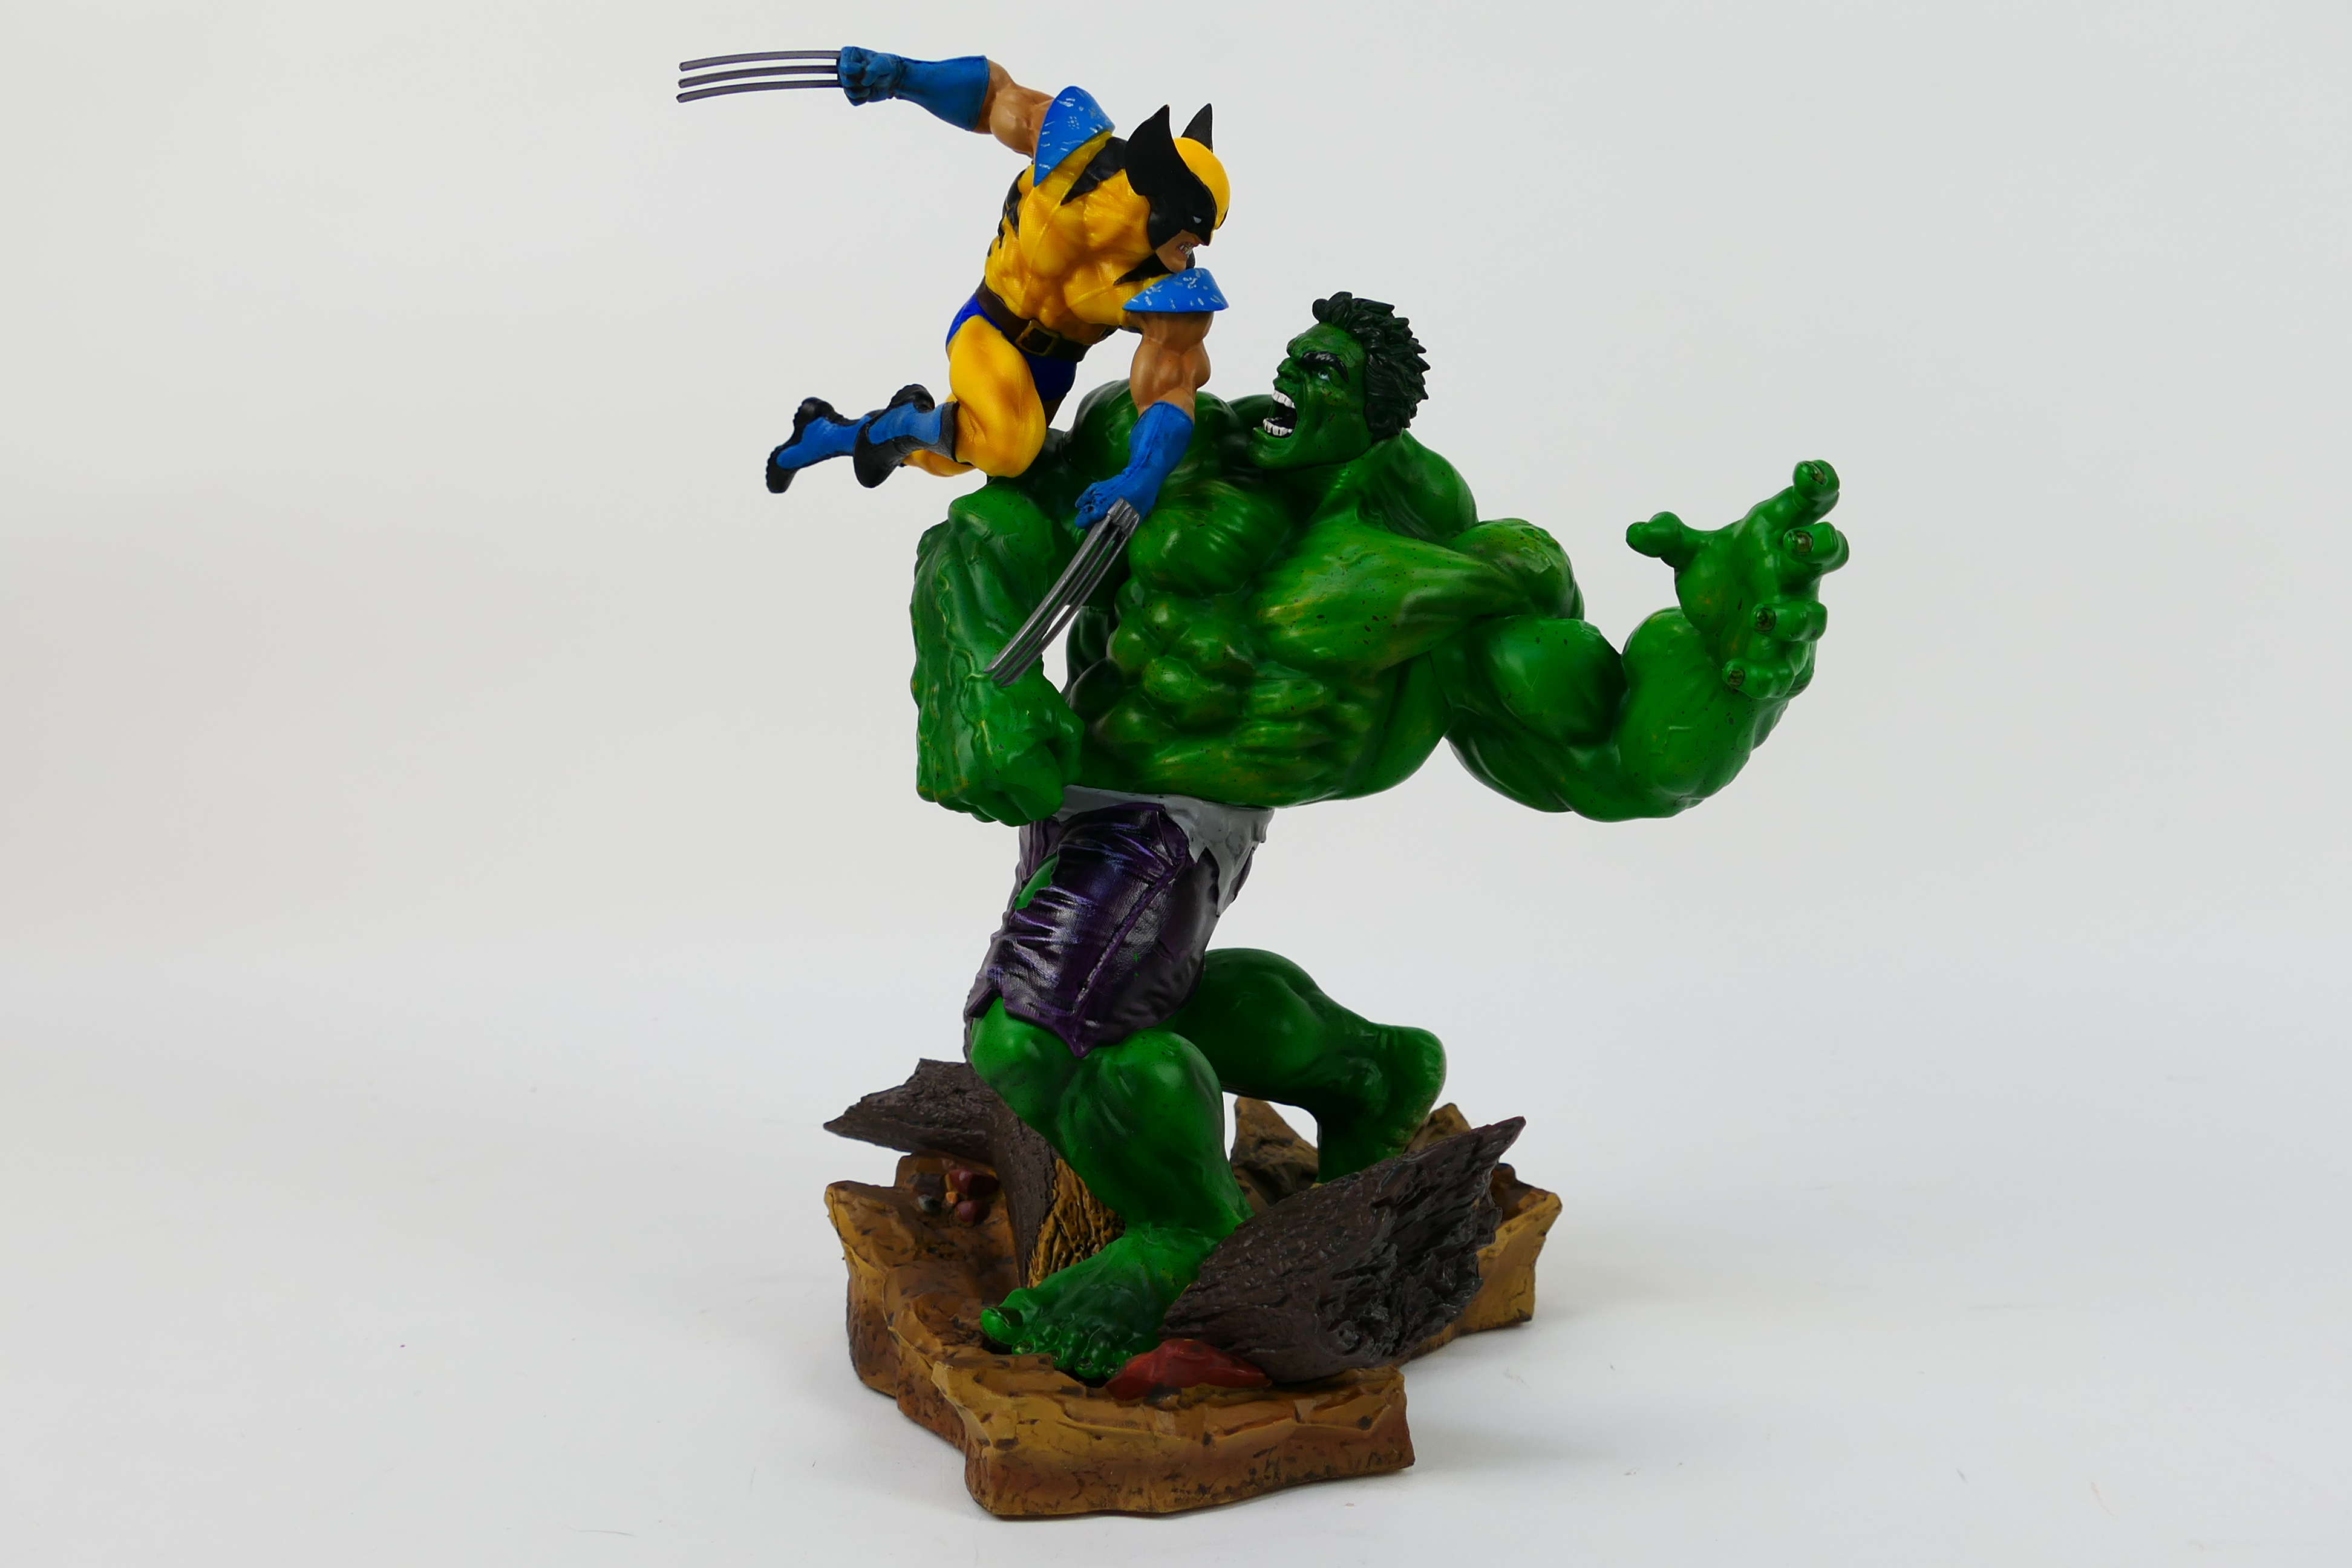 Tianbaotoys - Marvel - A boxed Hulk vs. Wolverine statue which is approximately 12 inches tall. - Image 2 of 6